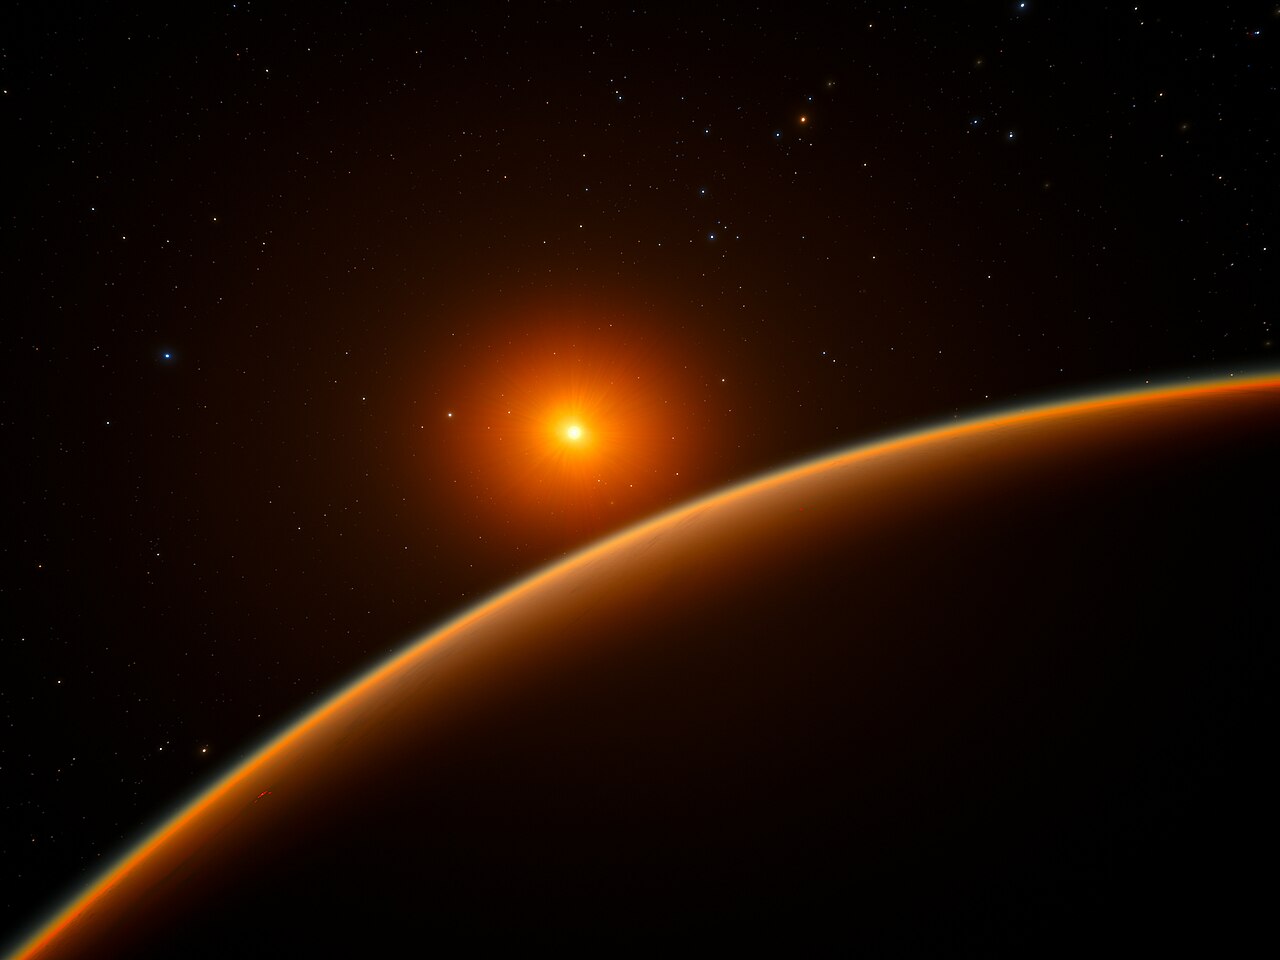 An ice ball with an ocean: astronomers have found an exoplanet with promising life potential